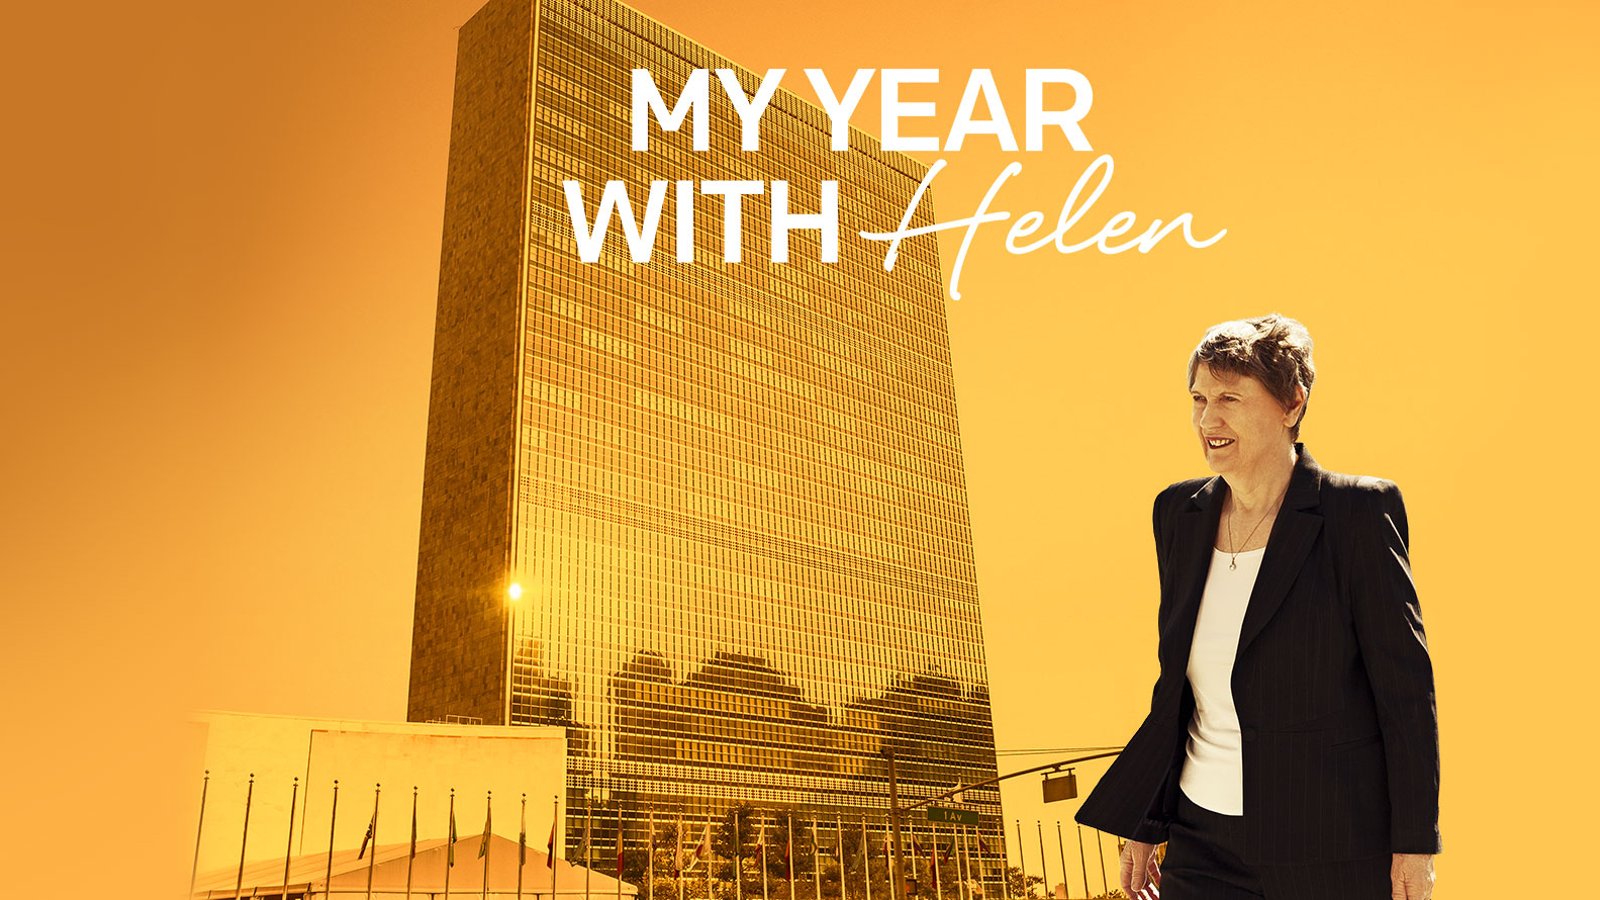 My Year With Helen - The United Nations Chooses a New Secretary General